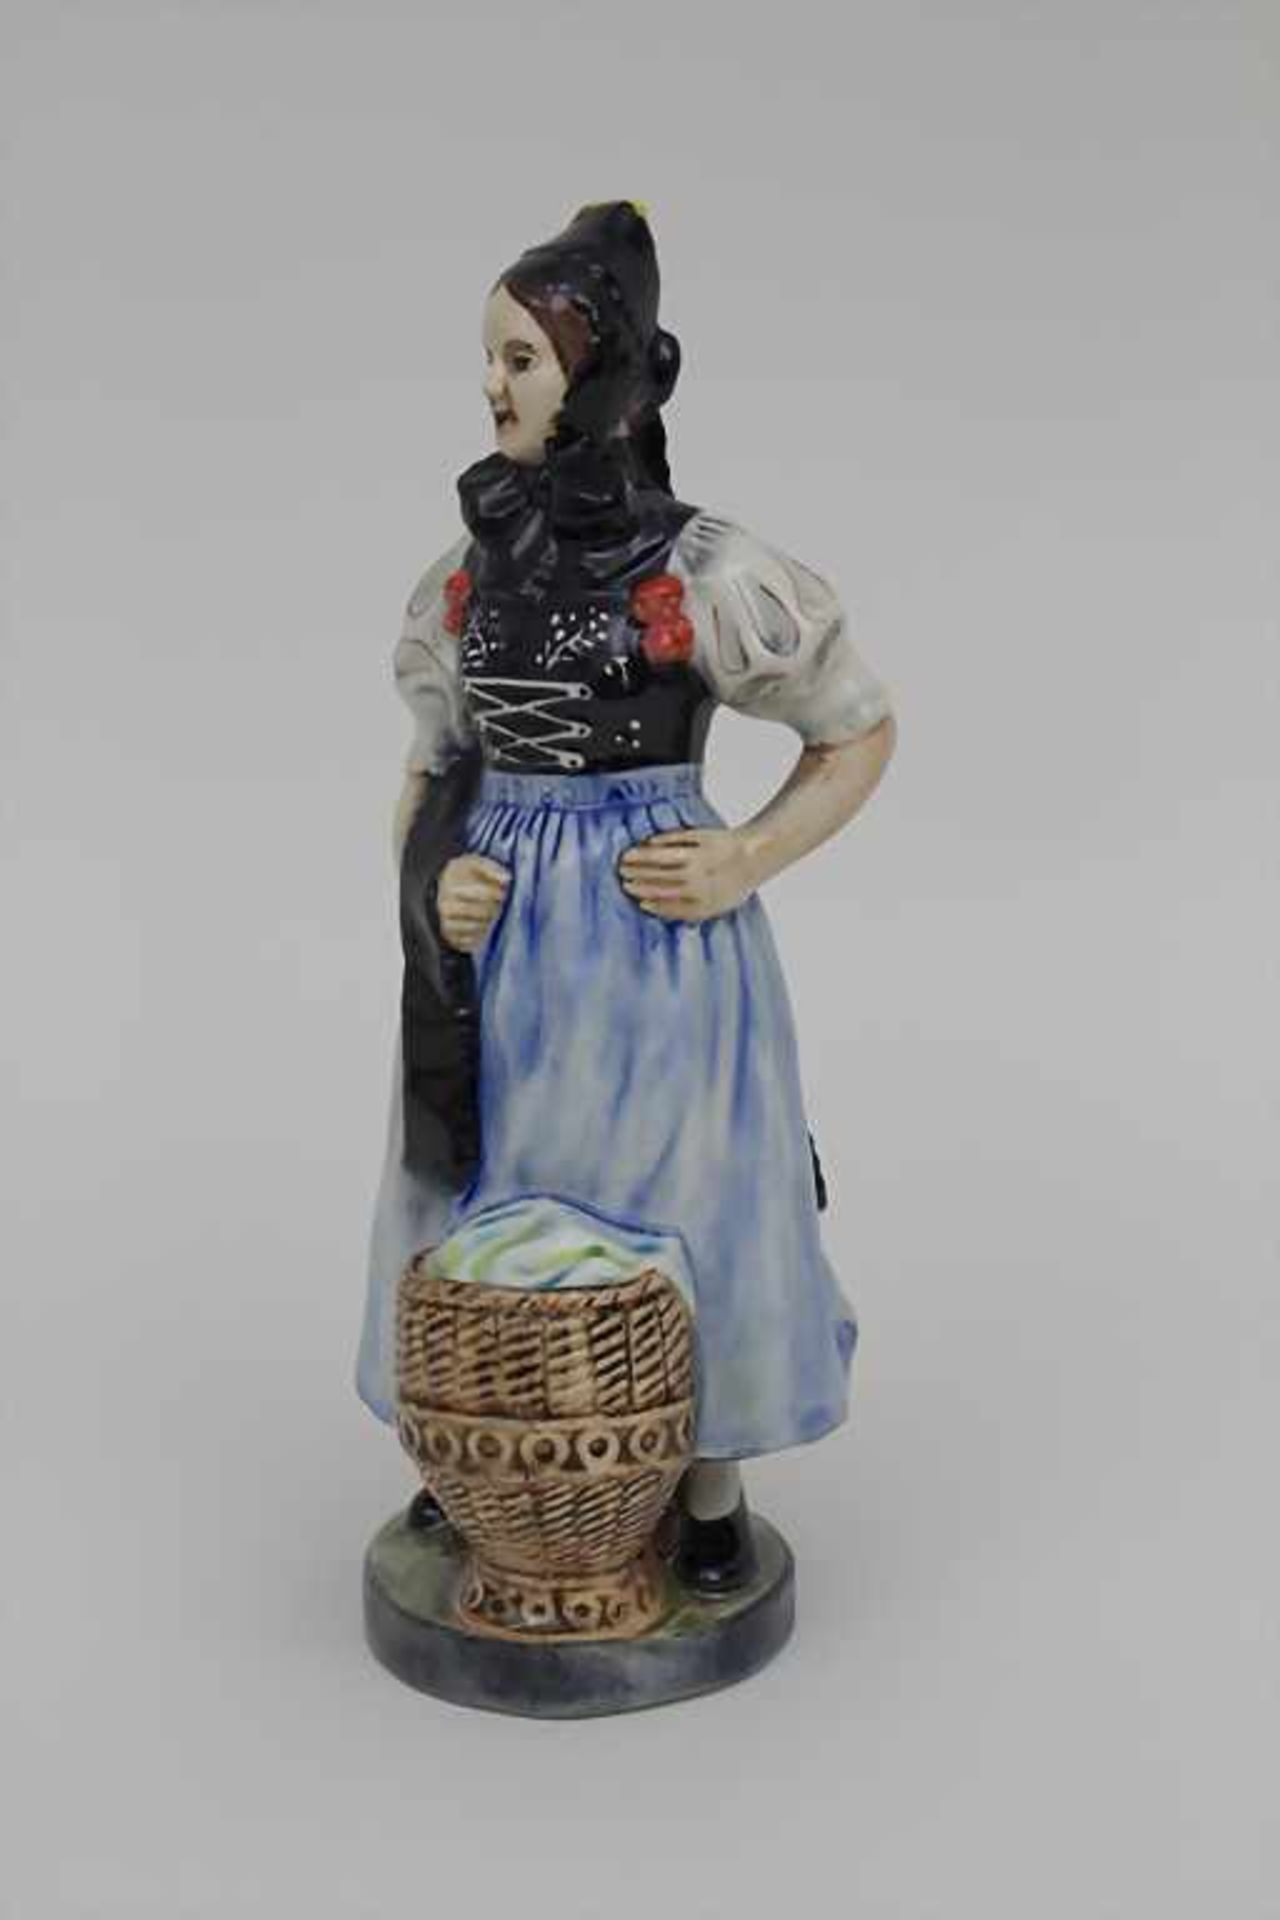 Trachtenfigur 'Tribergerin' / A costumed woman from the Black Forest, Karlsruher Majolika, um 1940 - Image 3 of 4